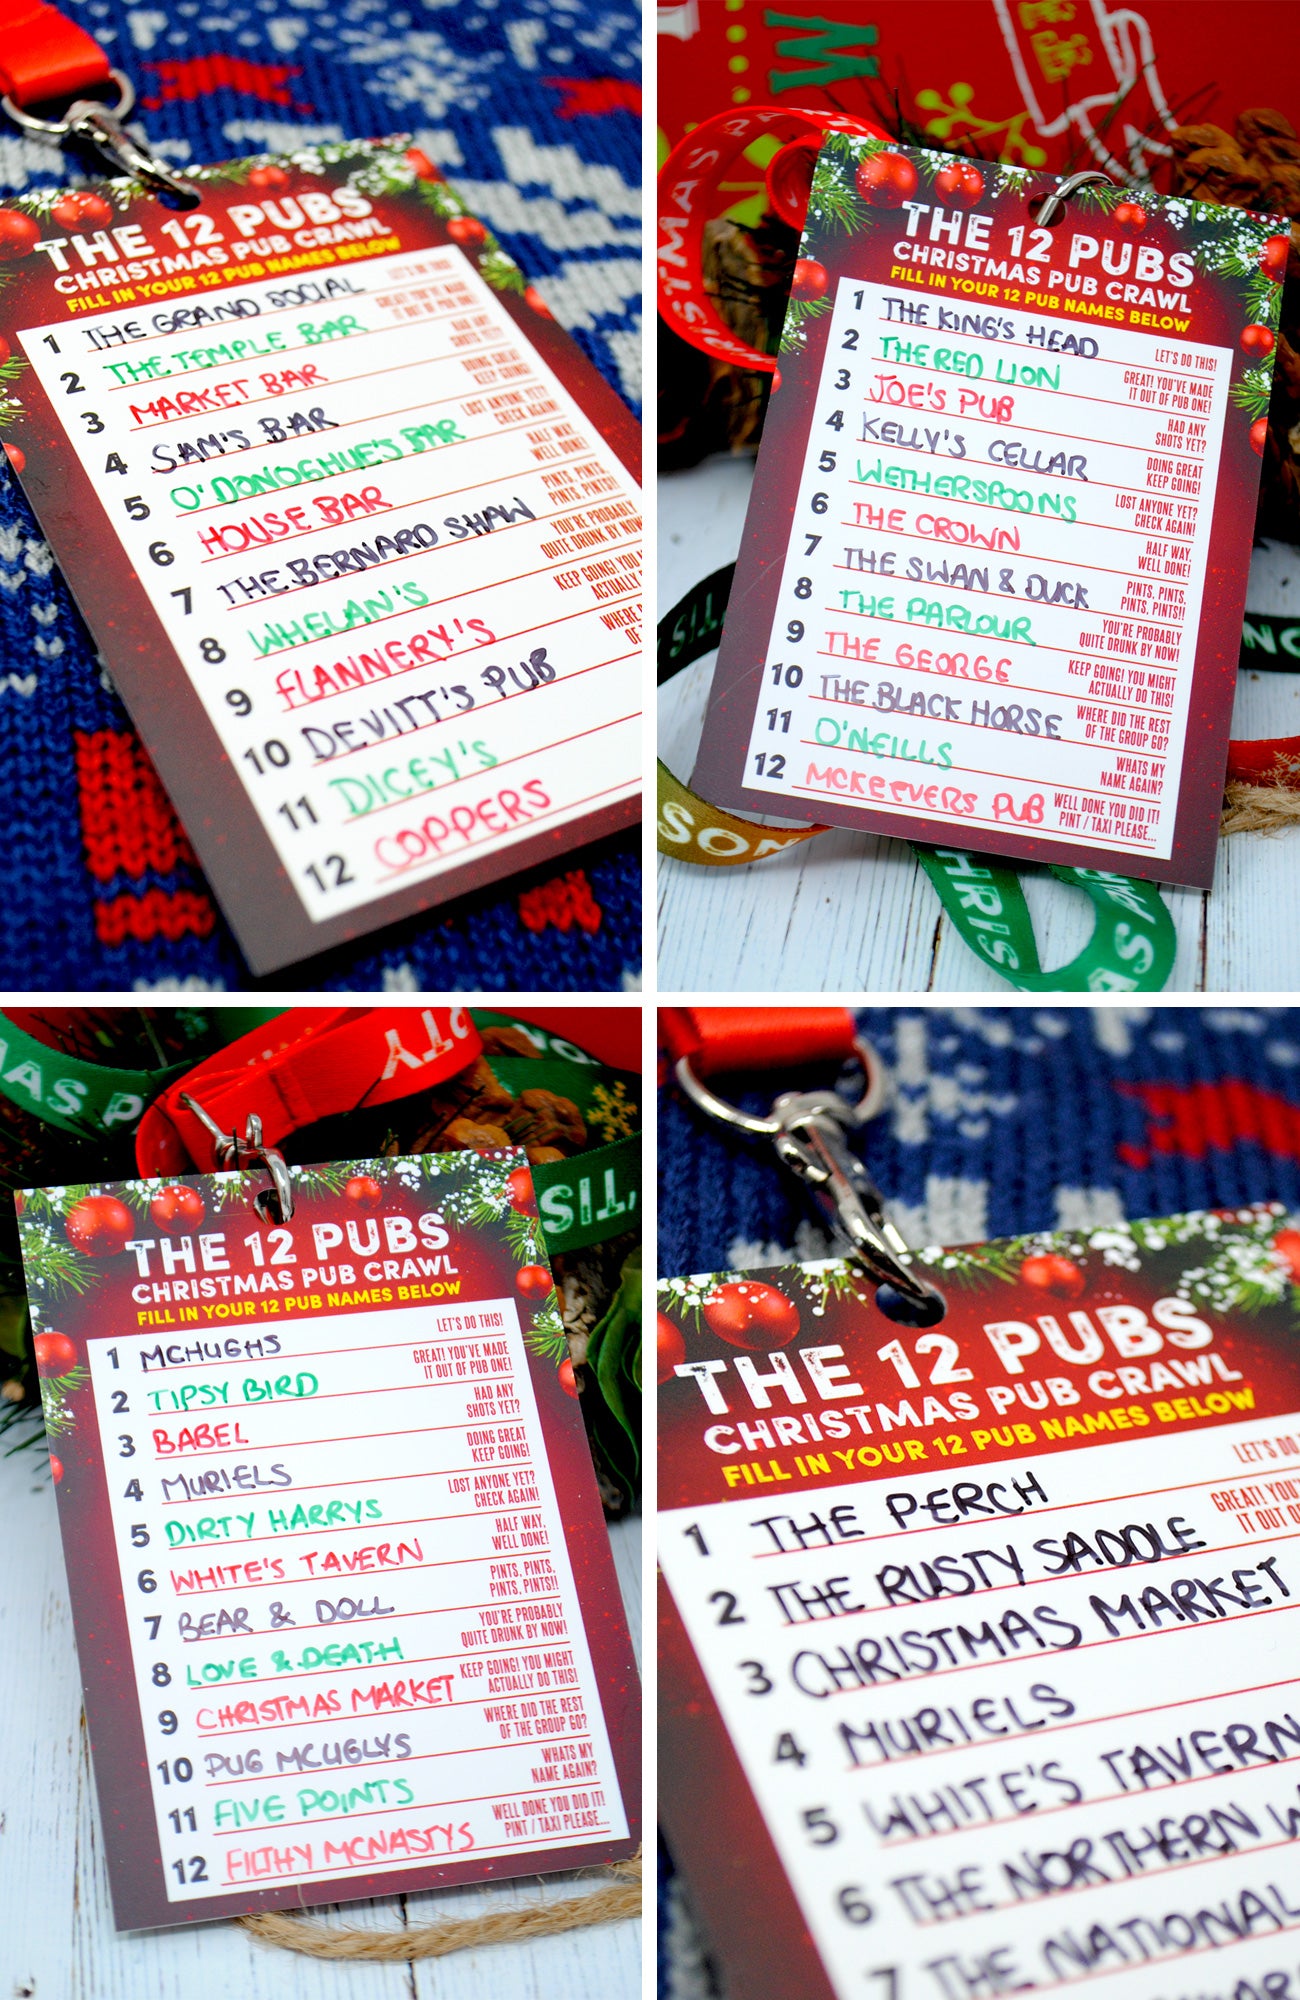 12 pubs of christmas office work party ideas